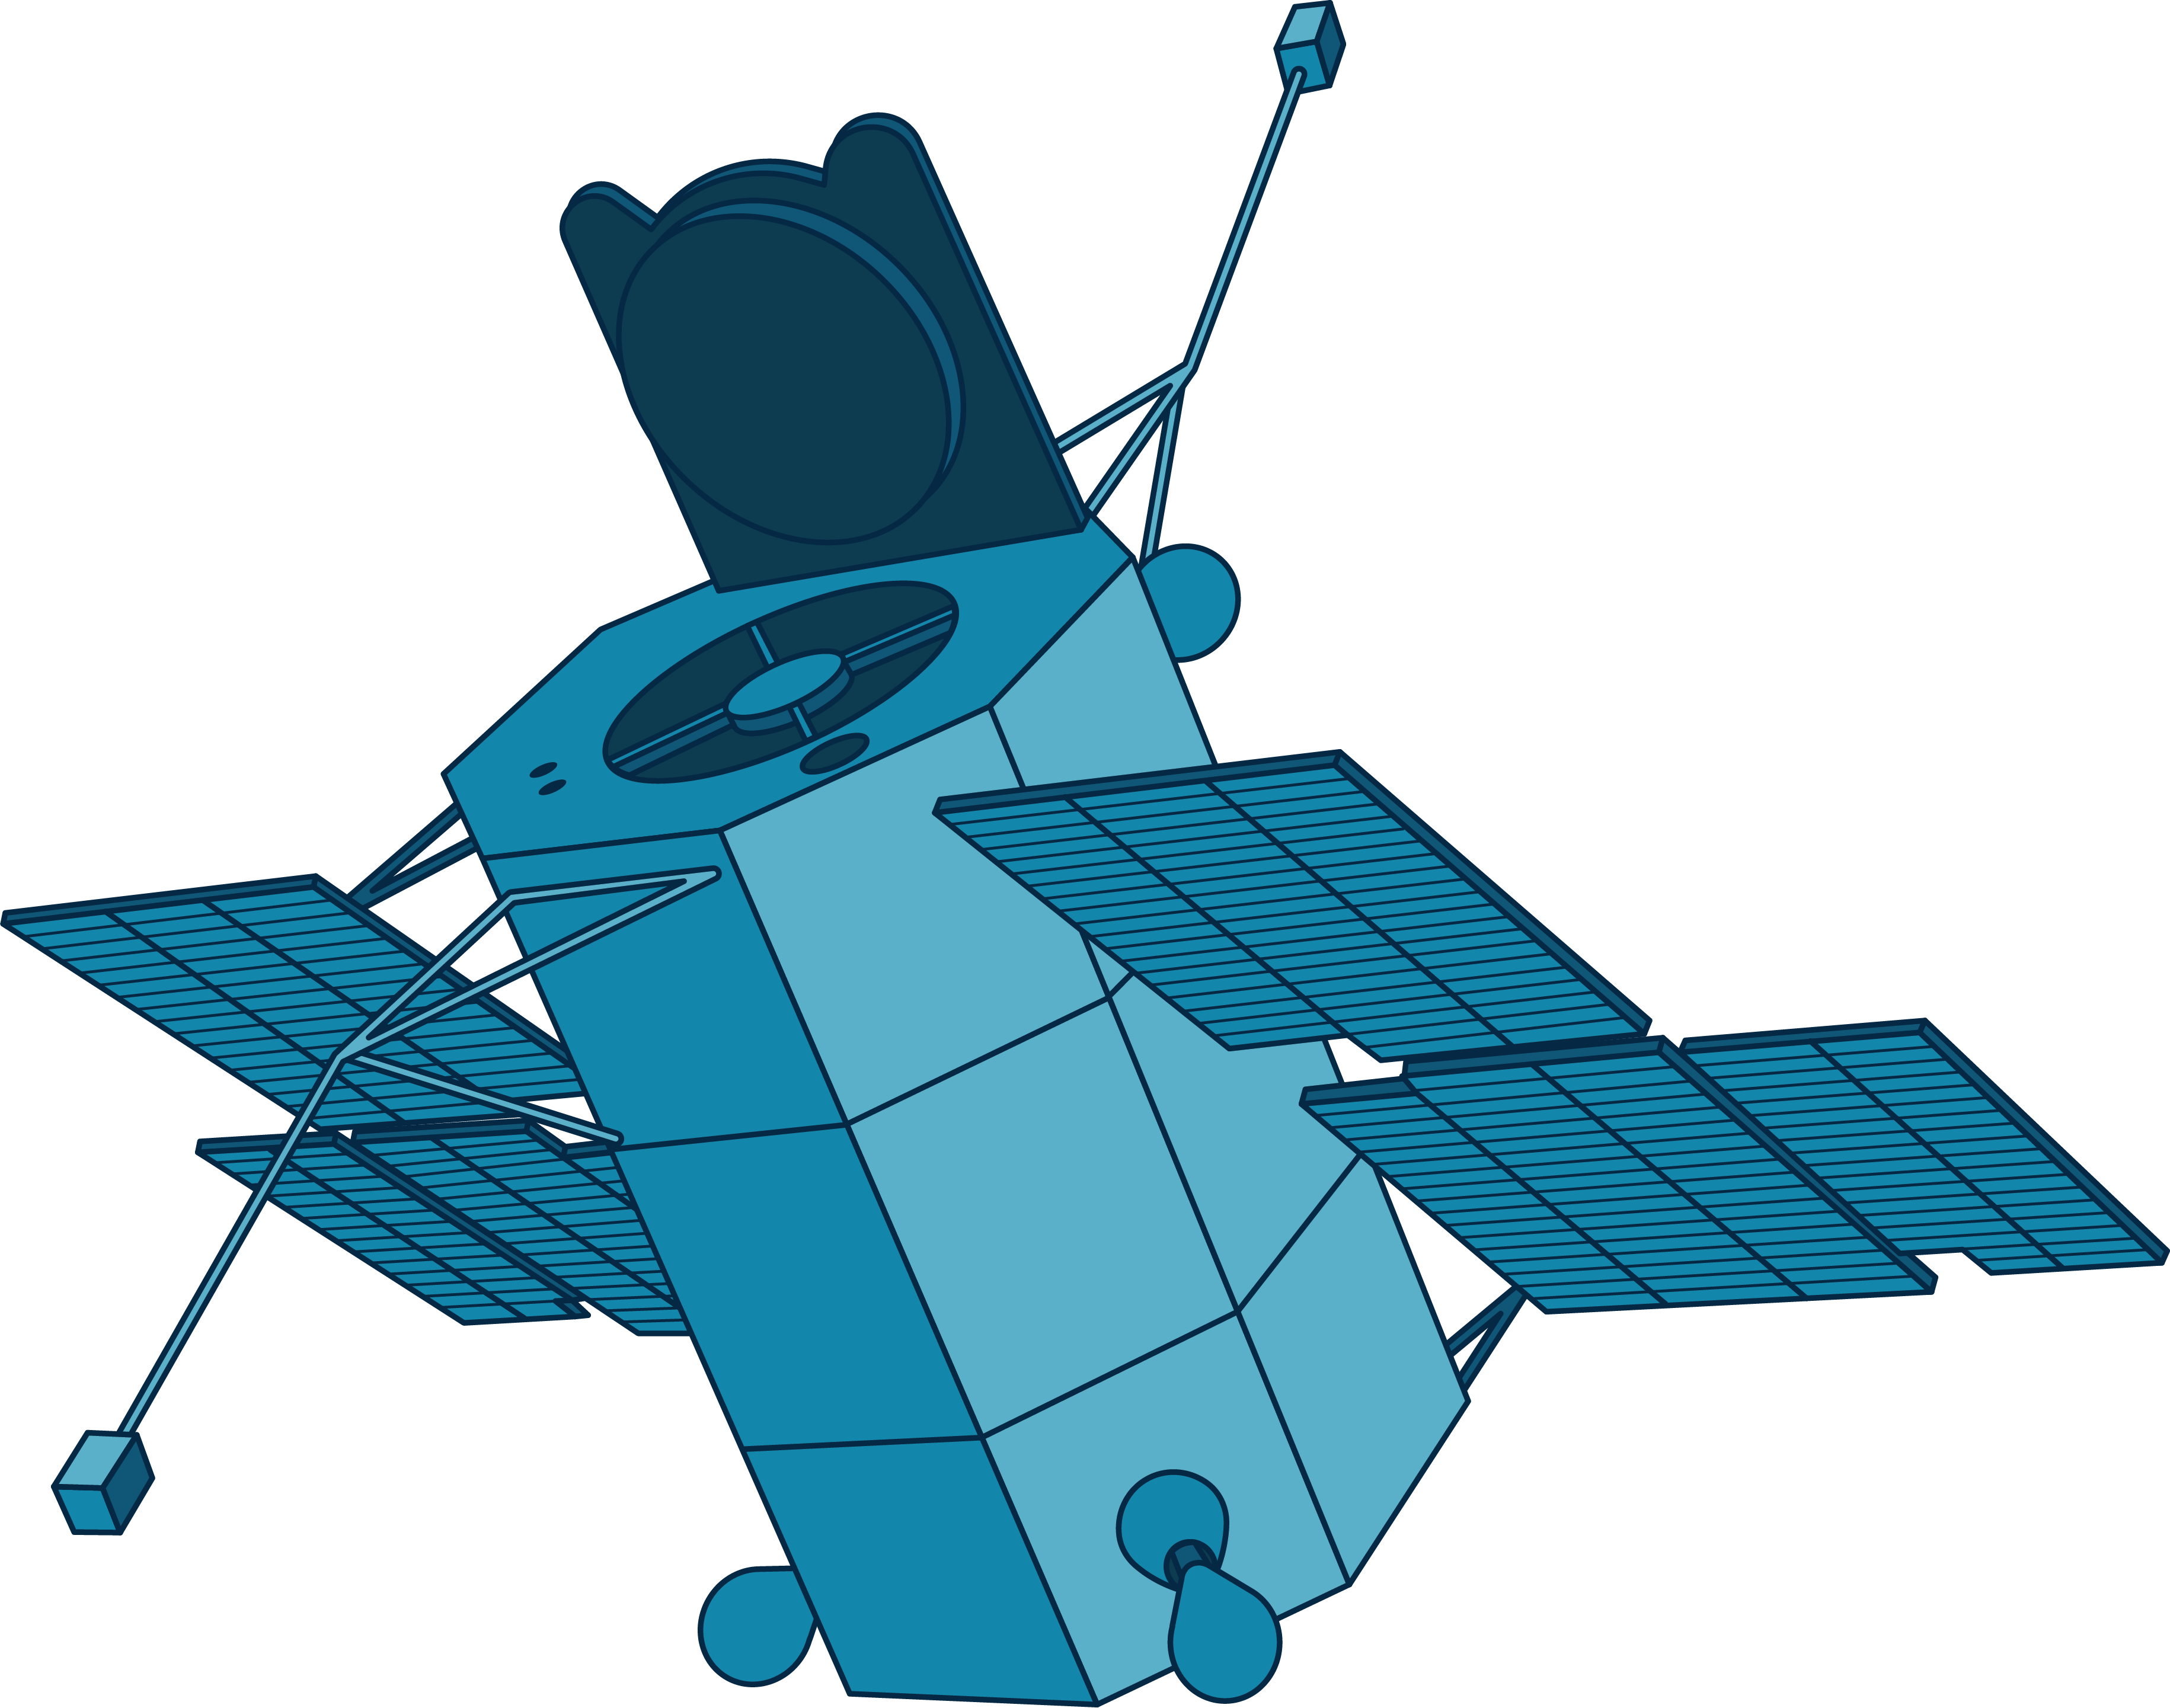 This illustration shows one of NASA's OAO spacecraft in shades of blue. The body of the satellite is an octagon. The telescope opening is embedded at the top of the octagon, which also has a flap that is open. Two-layered solar panels are attached on both sides. Antennae extend from the top and bottom.